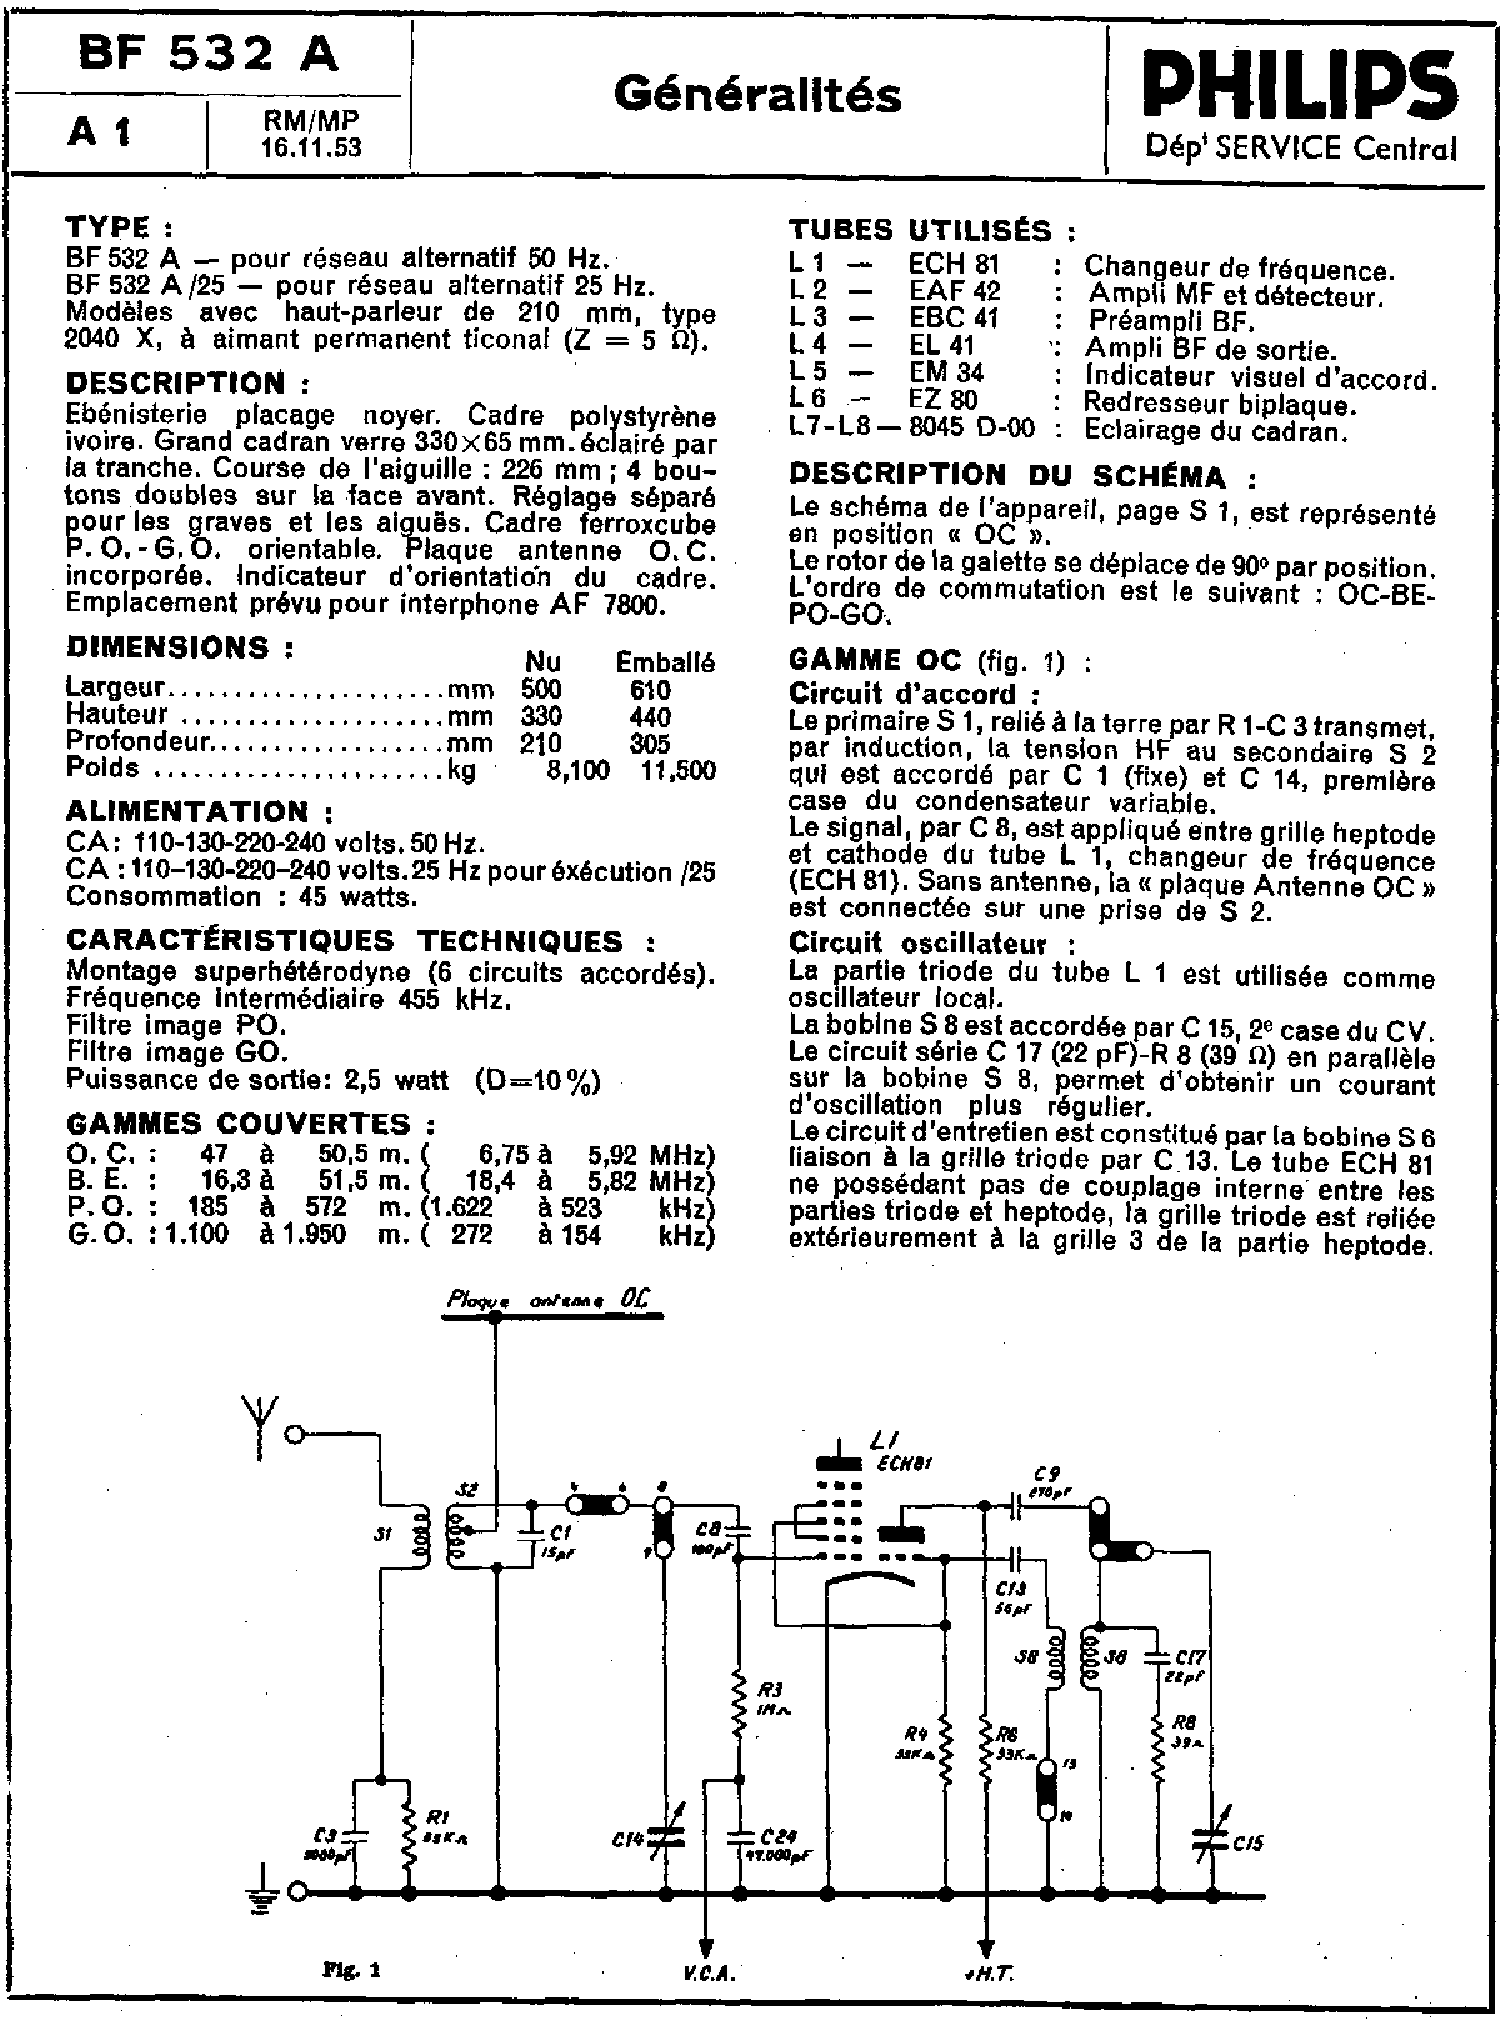 PHILIPS BF532A AC RECEIVER 1953 SM service manual (2nd page)